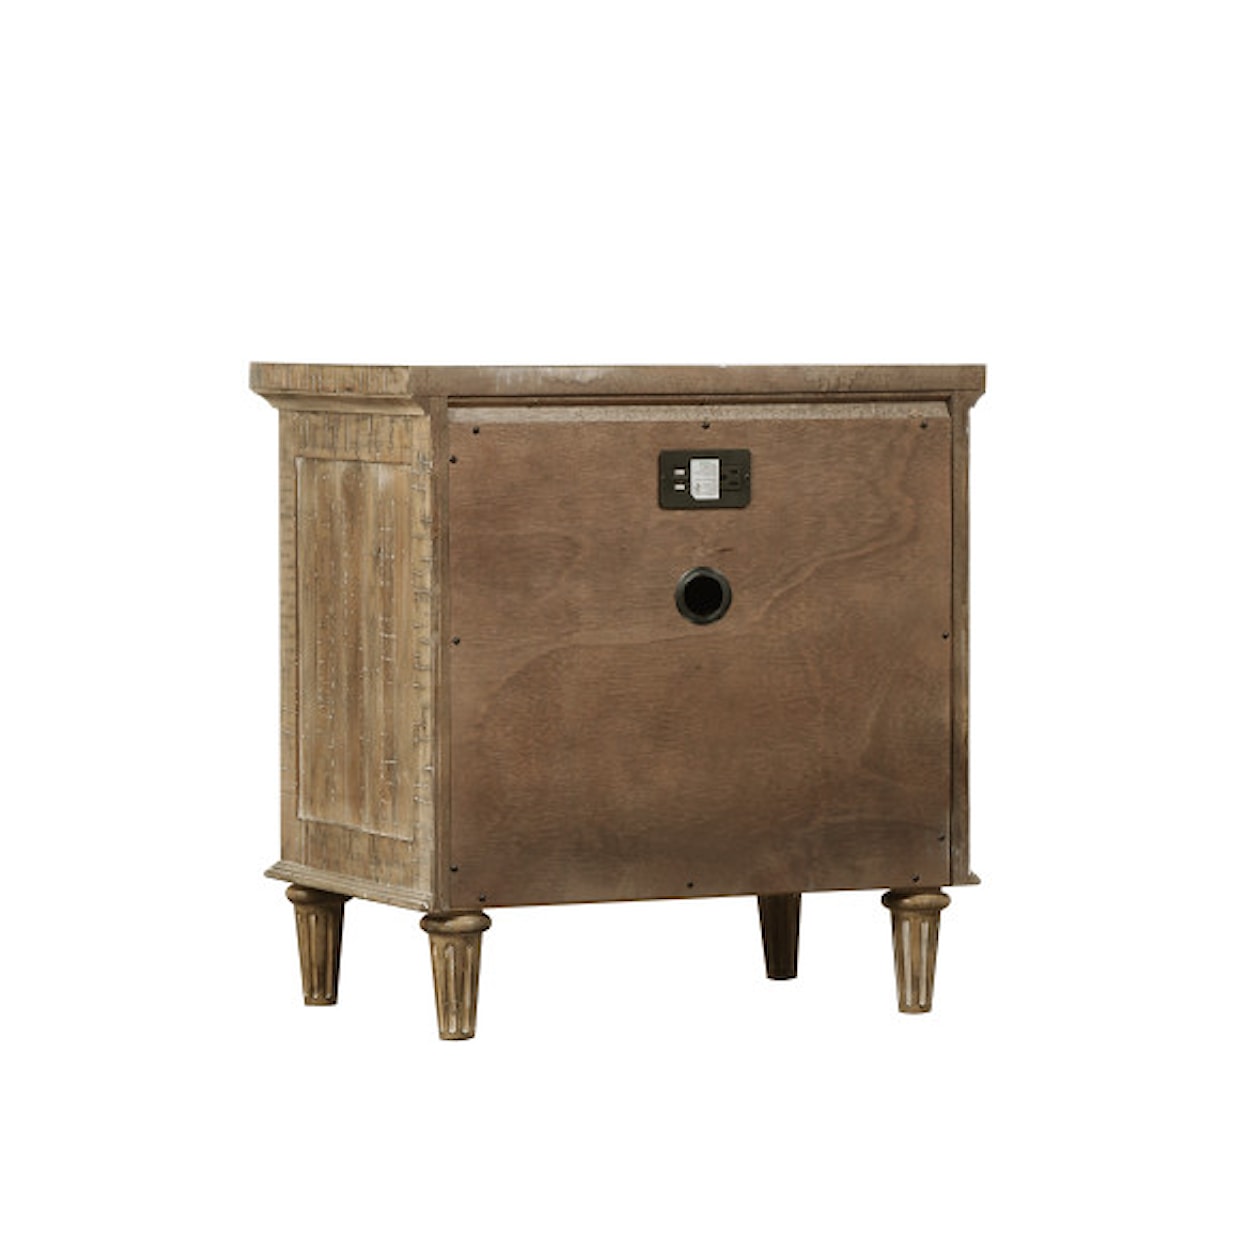 Emerald Interlude 2-Drawer Nightstand W/Power Outlet Sandstone